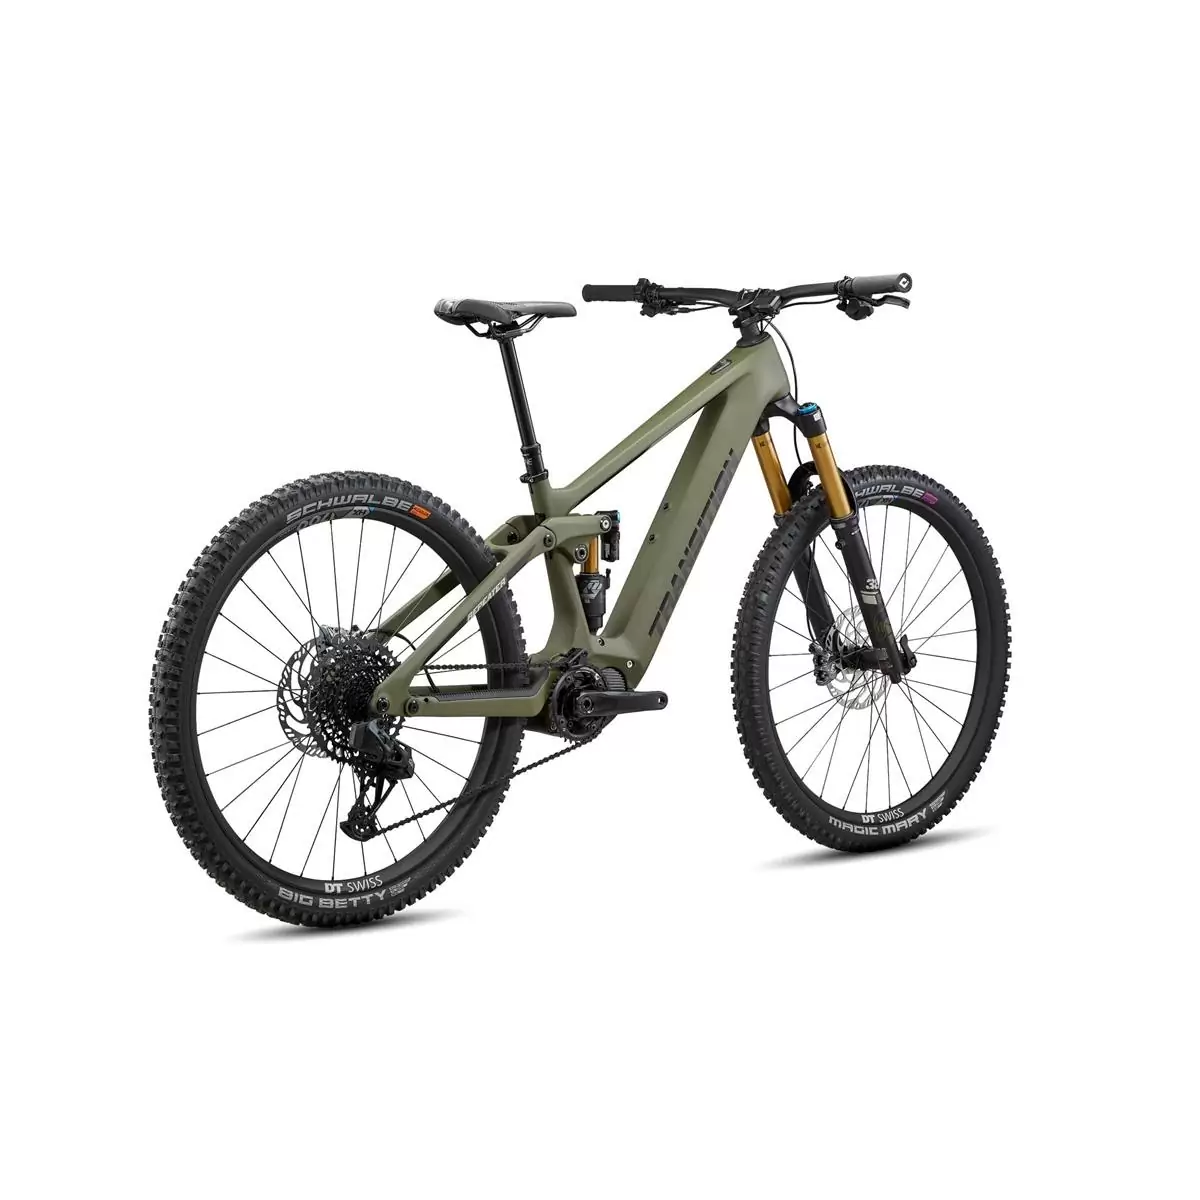 Repeater Carbon AXS 29'' 160mm 12v 630Wh Shimano EP8 Mossy Green Taglia M #2